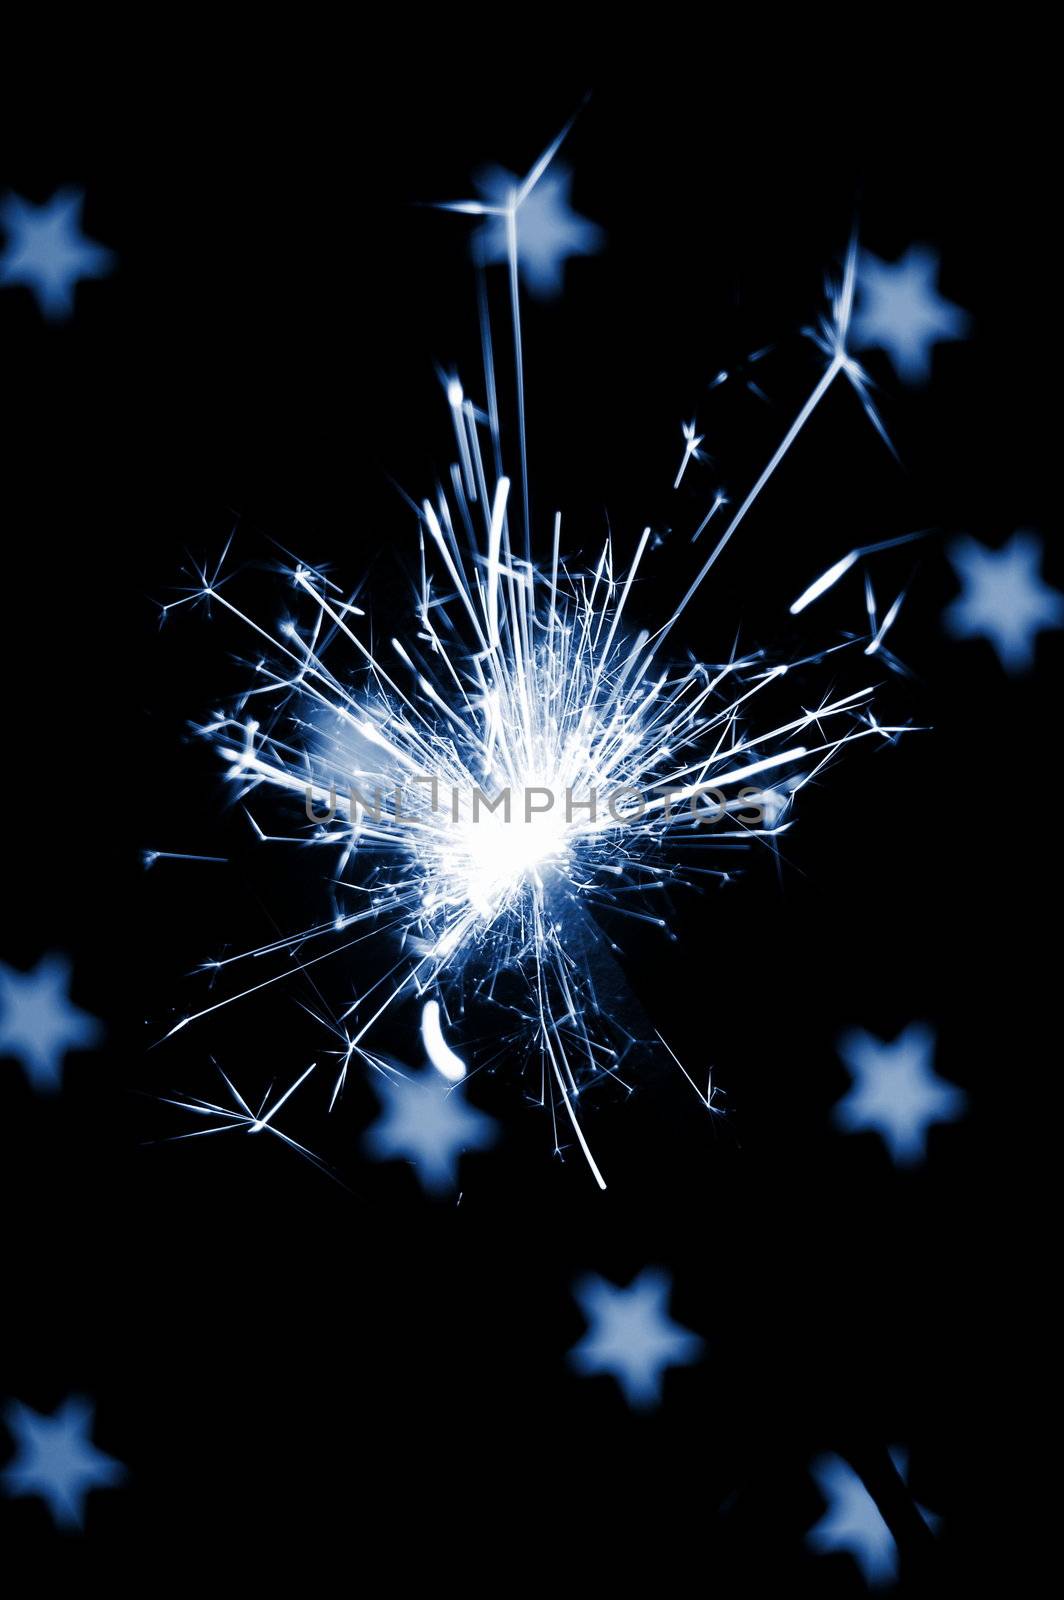 christmas sparkler with copyspace for text message